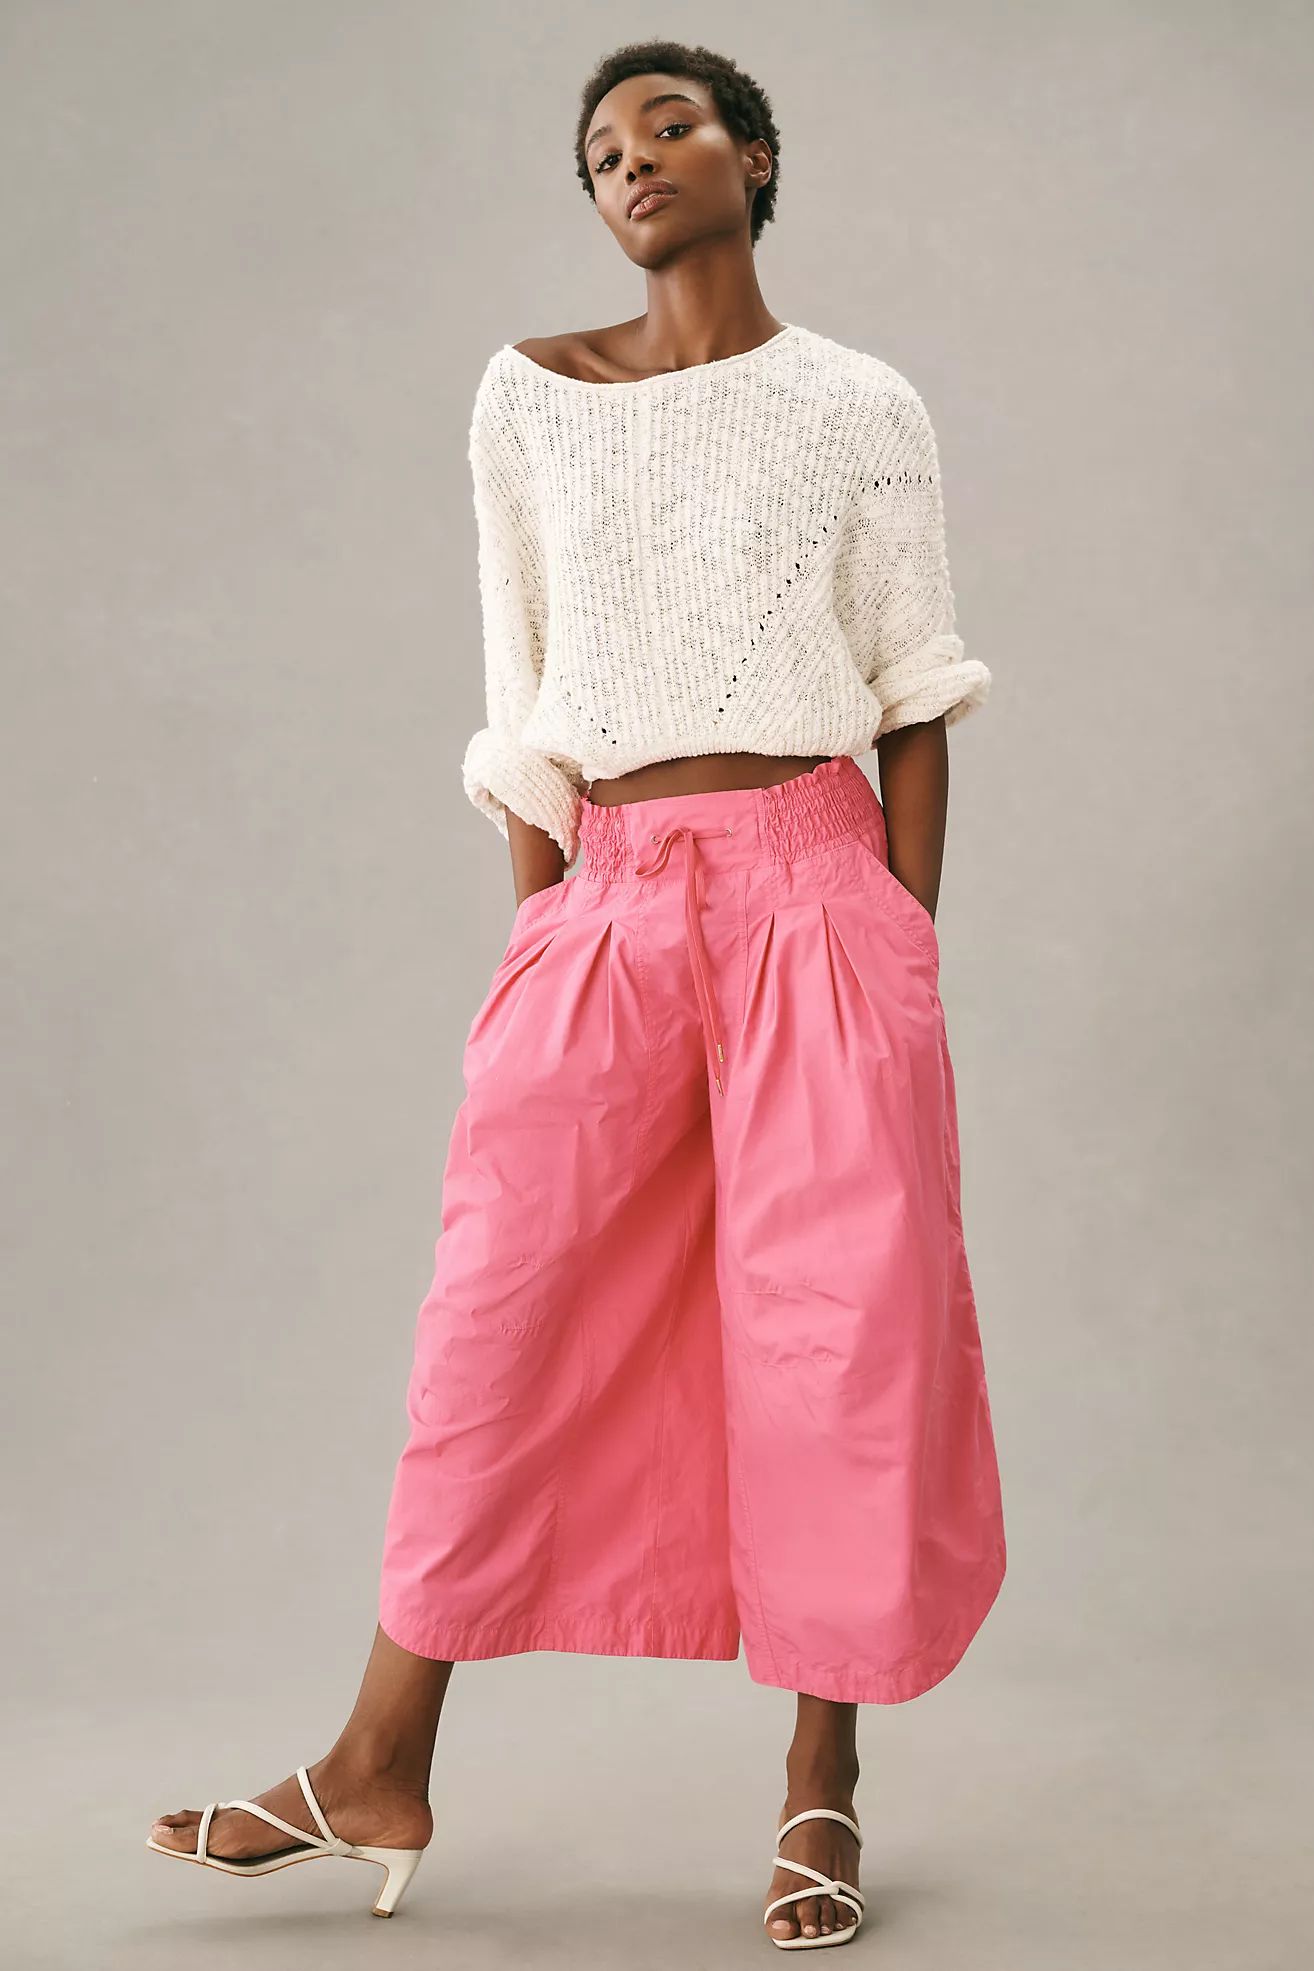 By Anthropologie Ruched Poplin Parachute Pants | Anthropologie (US)